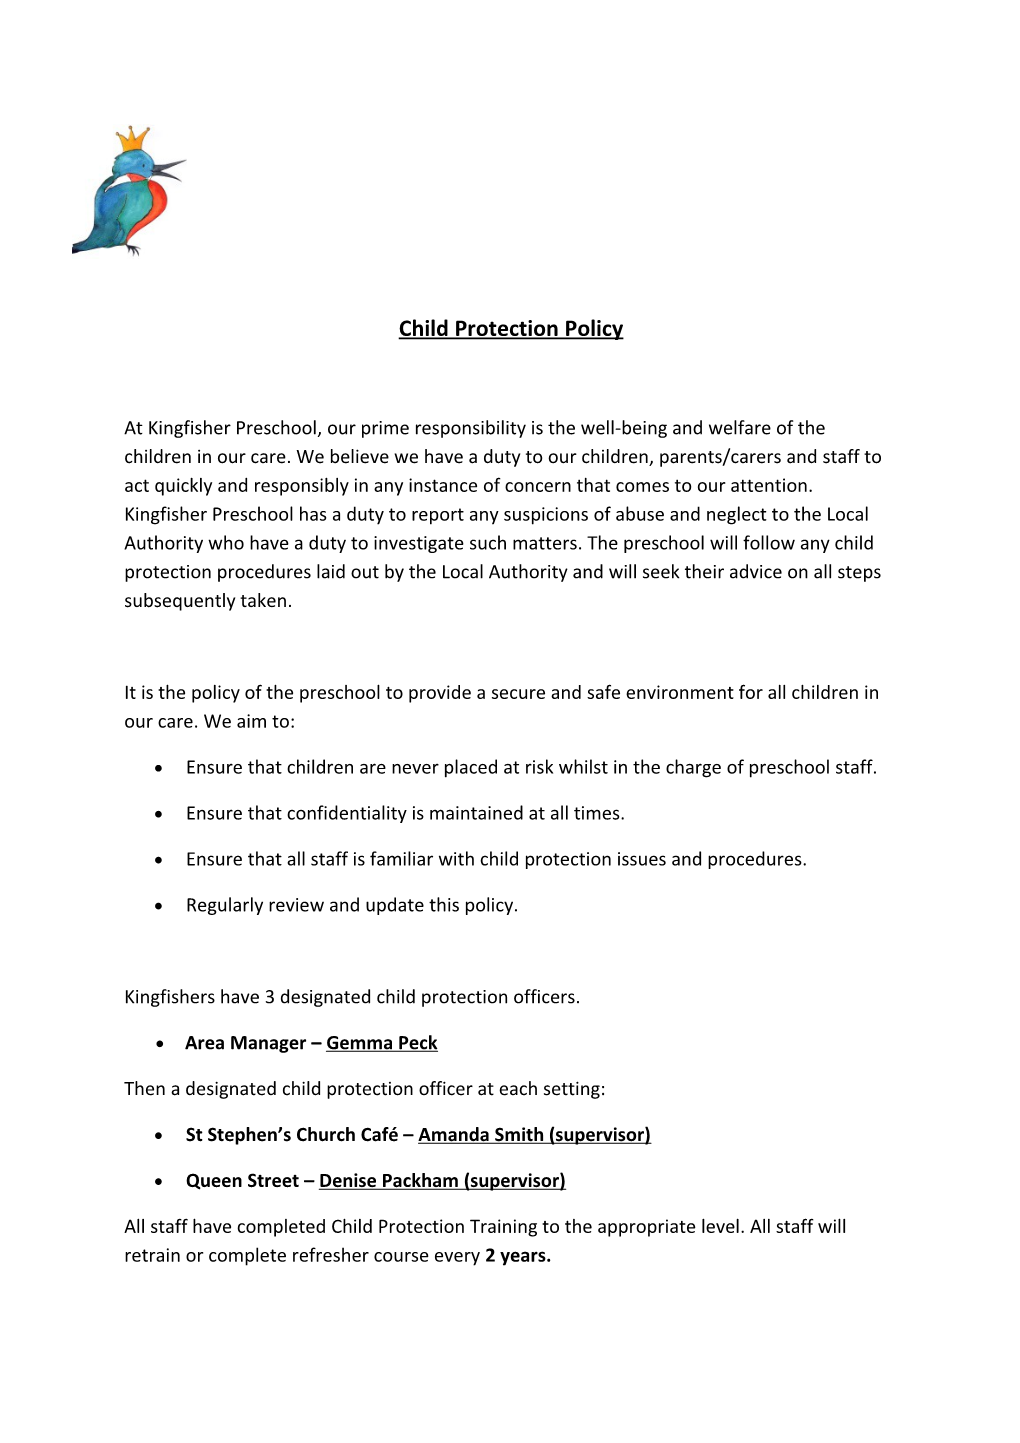 Child Protection Policy s5